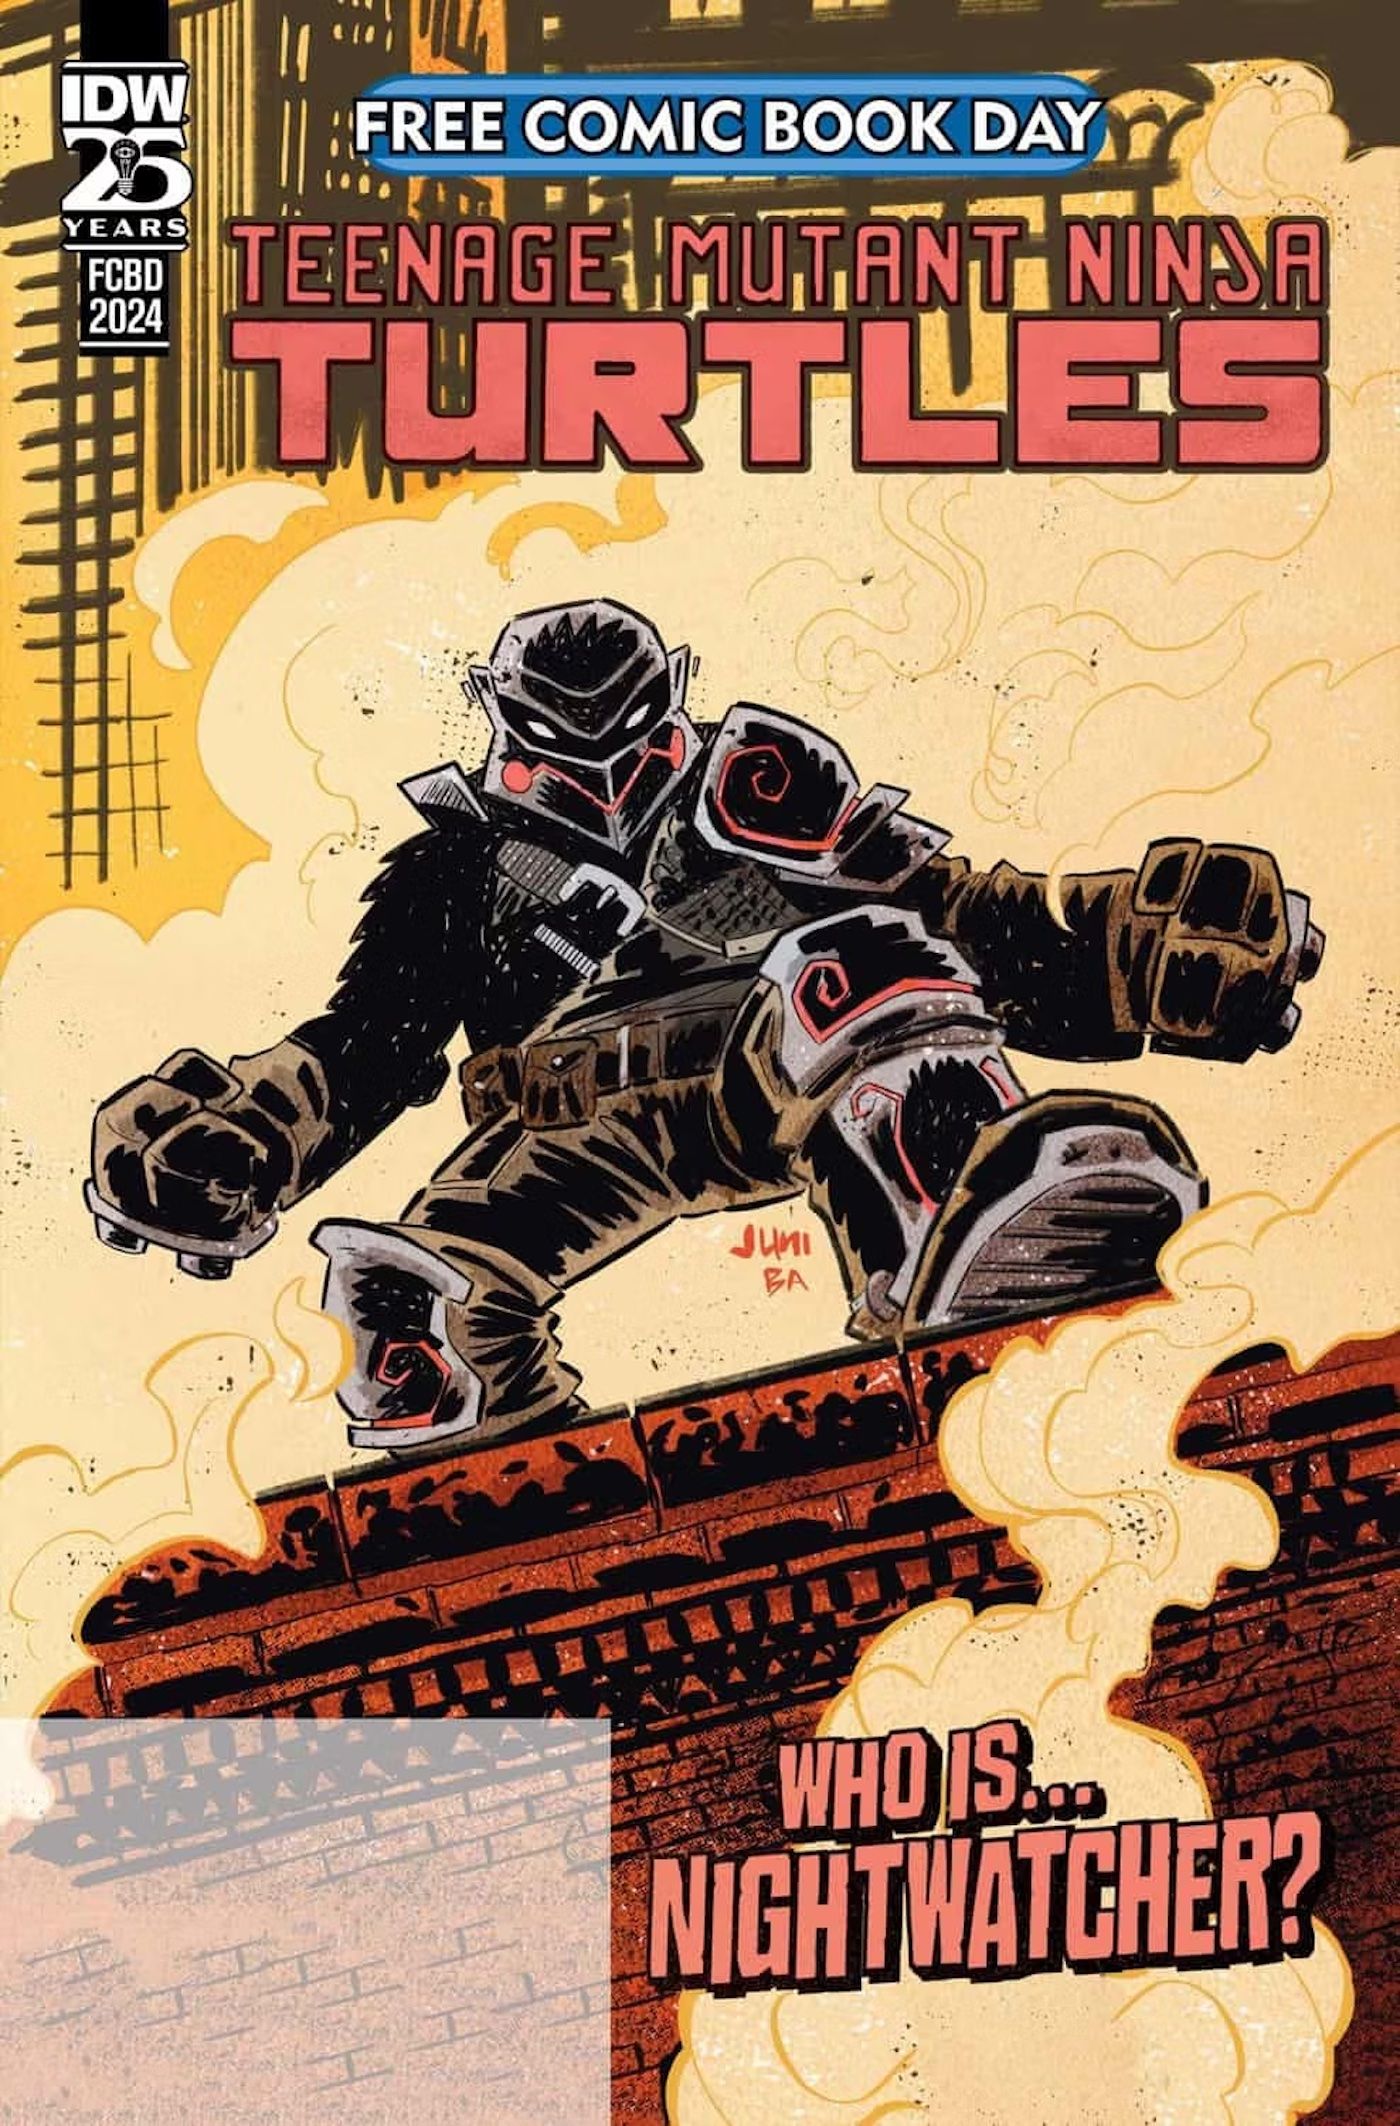 Nightwatcher on the cover of TMNT Free Comic Book Day issue